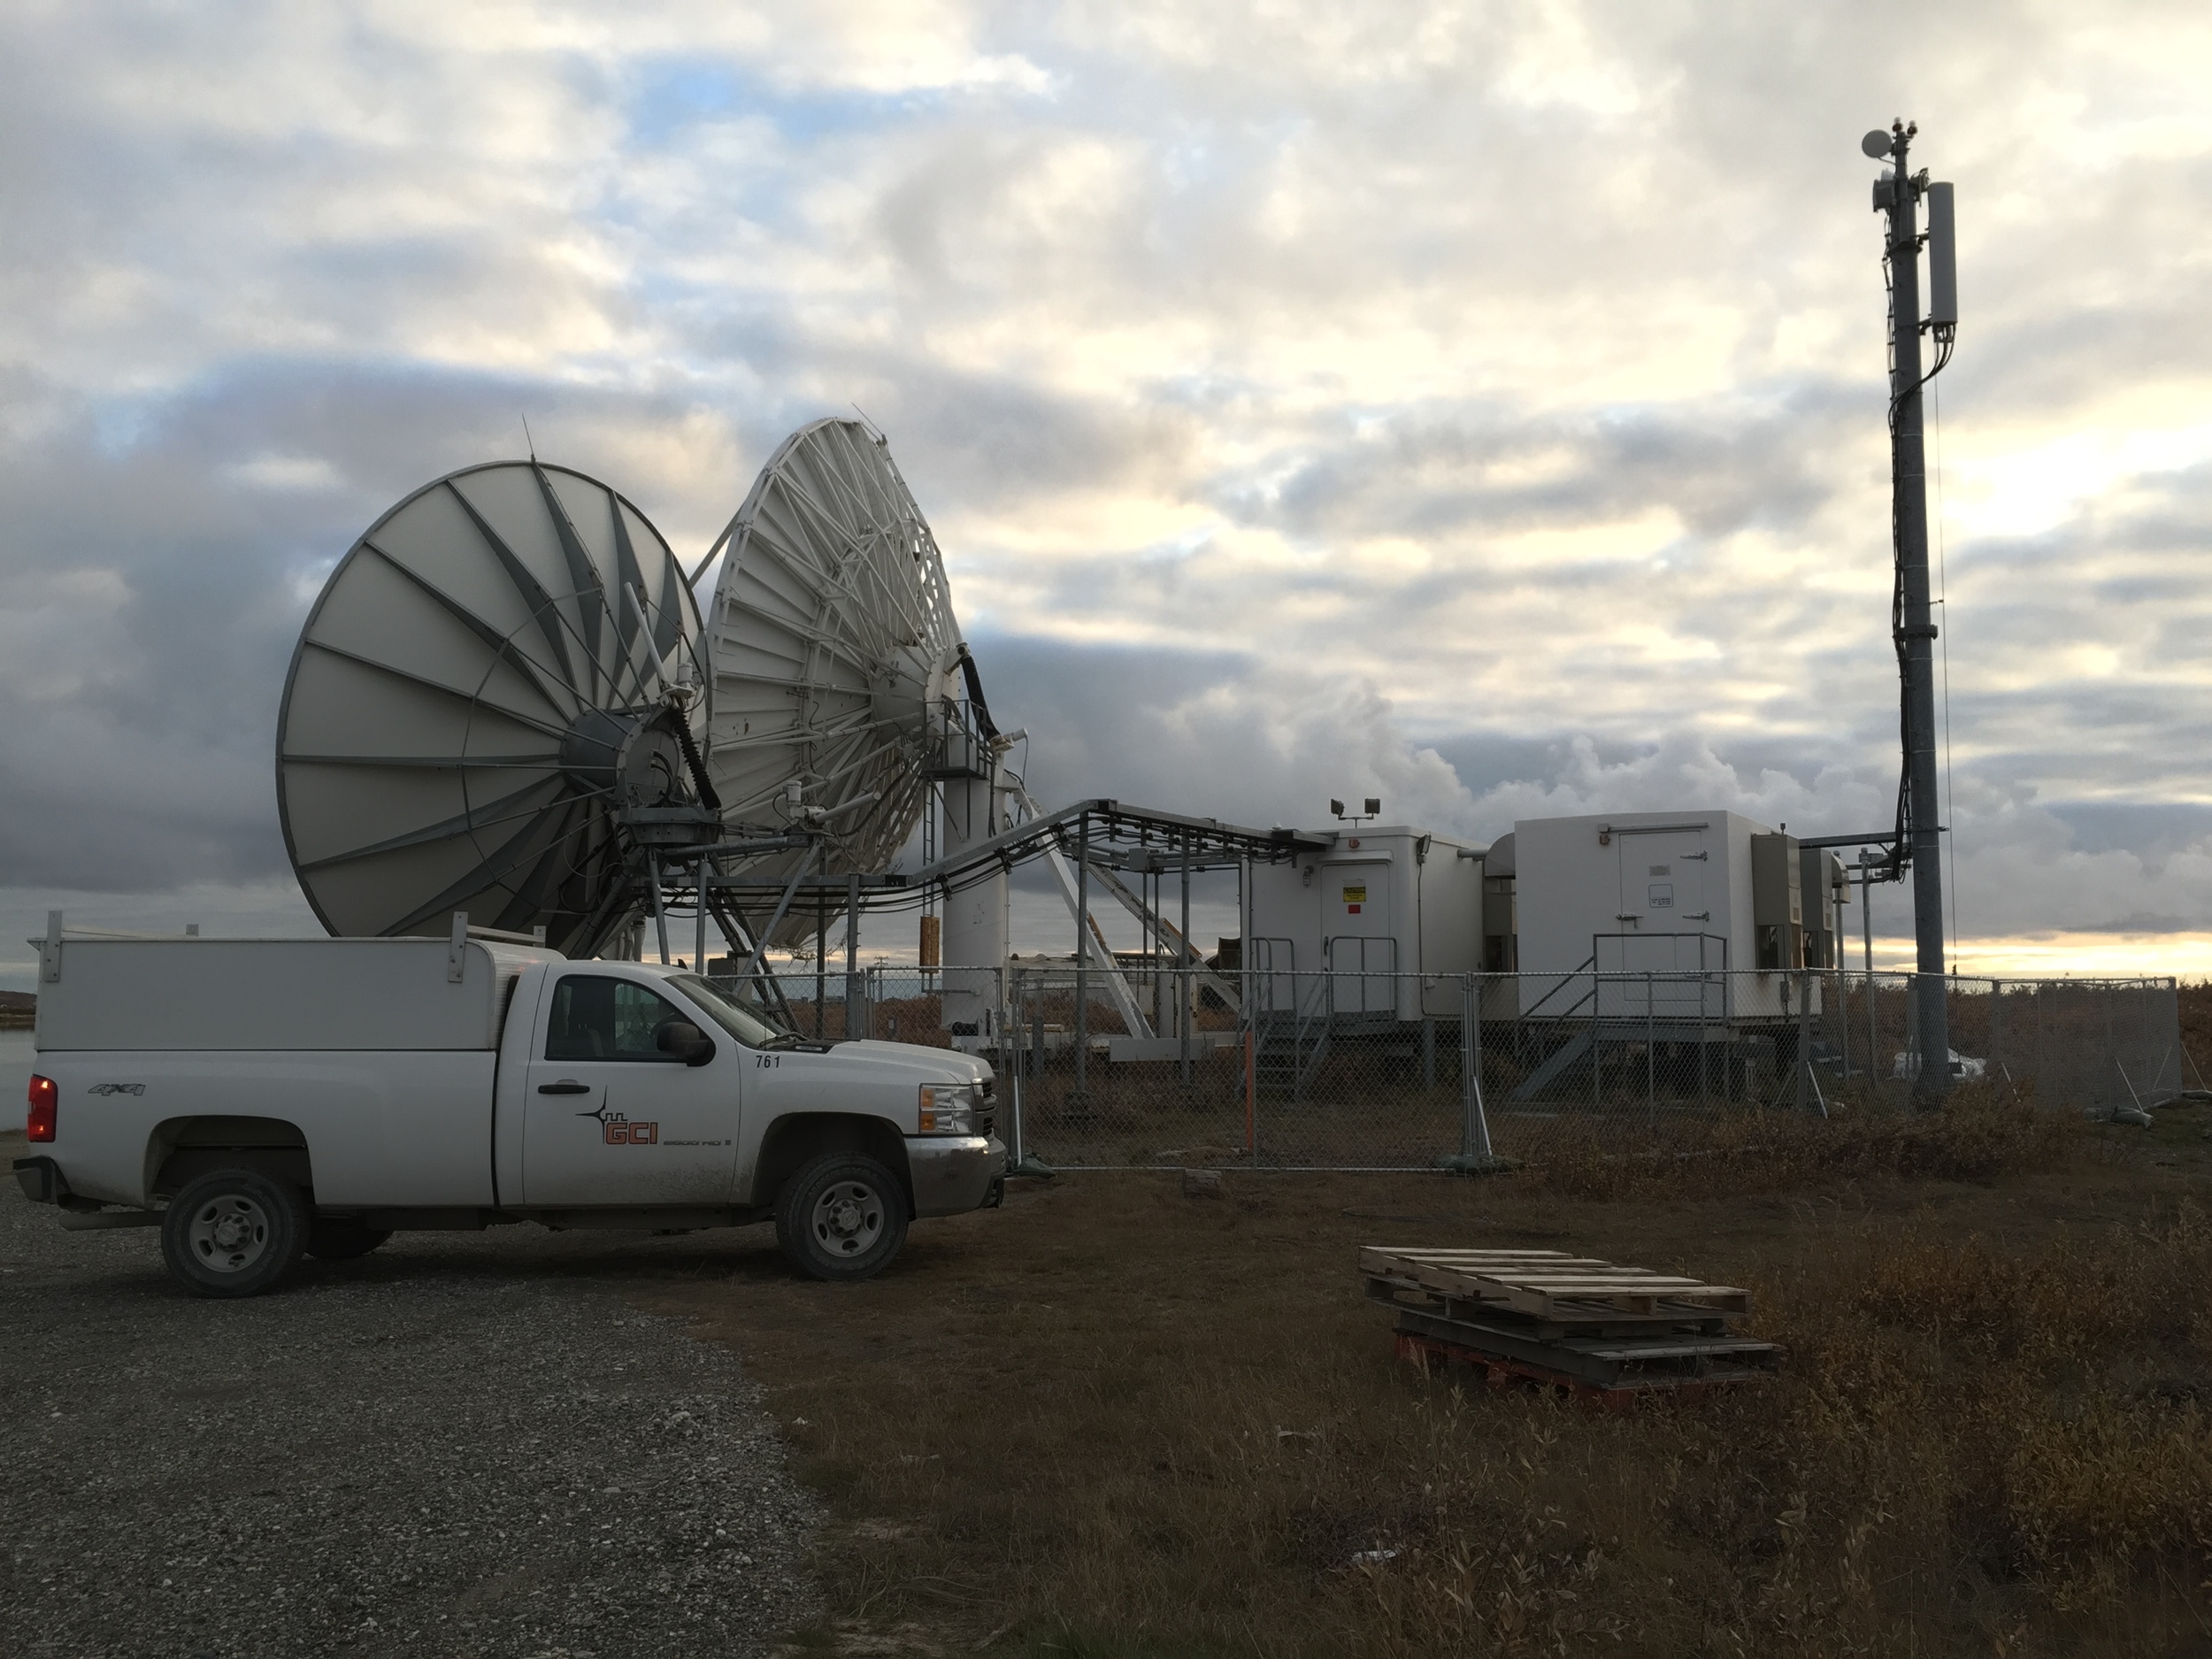  Kotzebue GCI Earth Station connected to the TERRA tower via fiber (Sept 2105) 